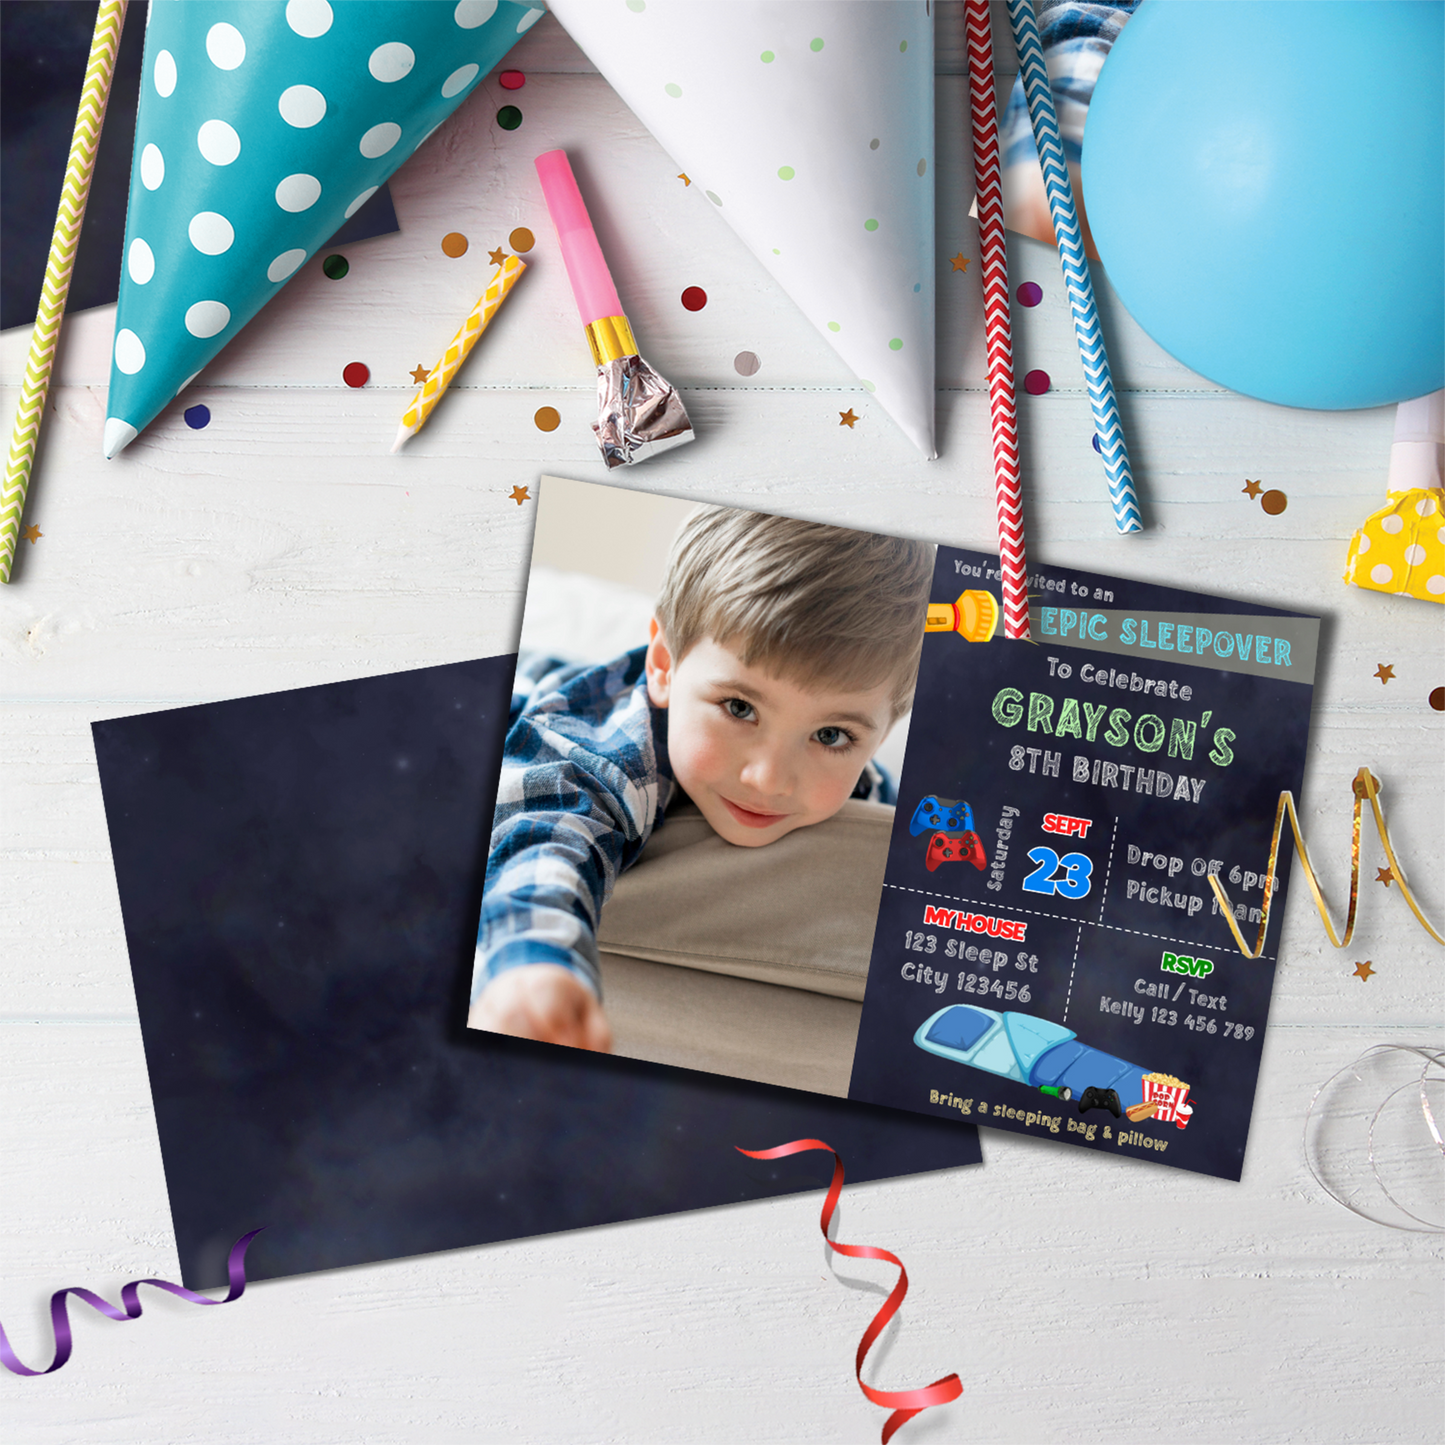 Personalized Photo Card Invitations for a Sleepover Party